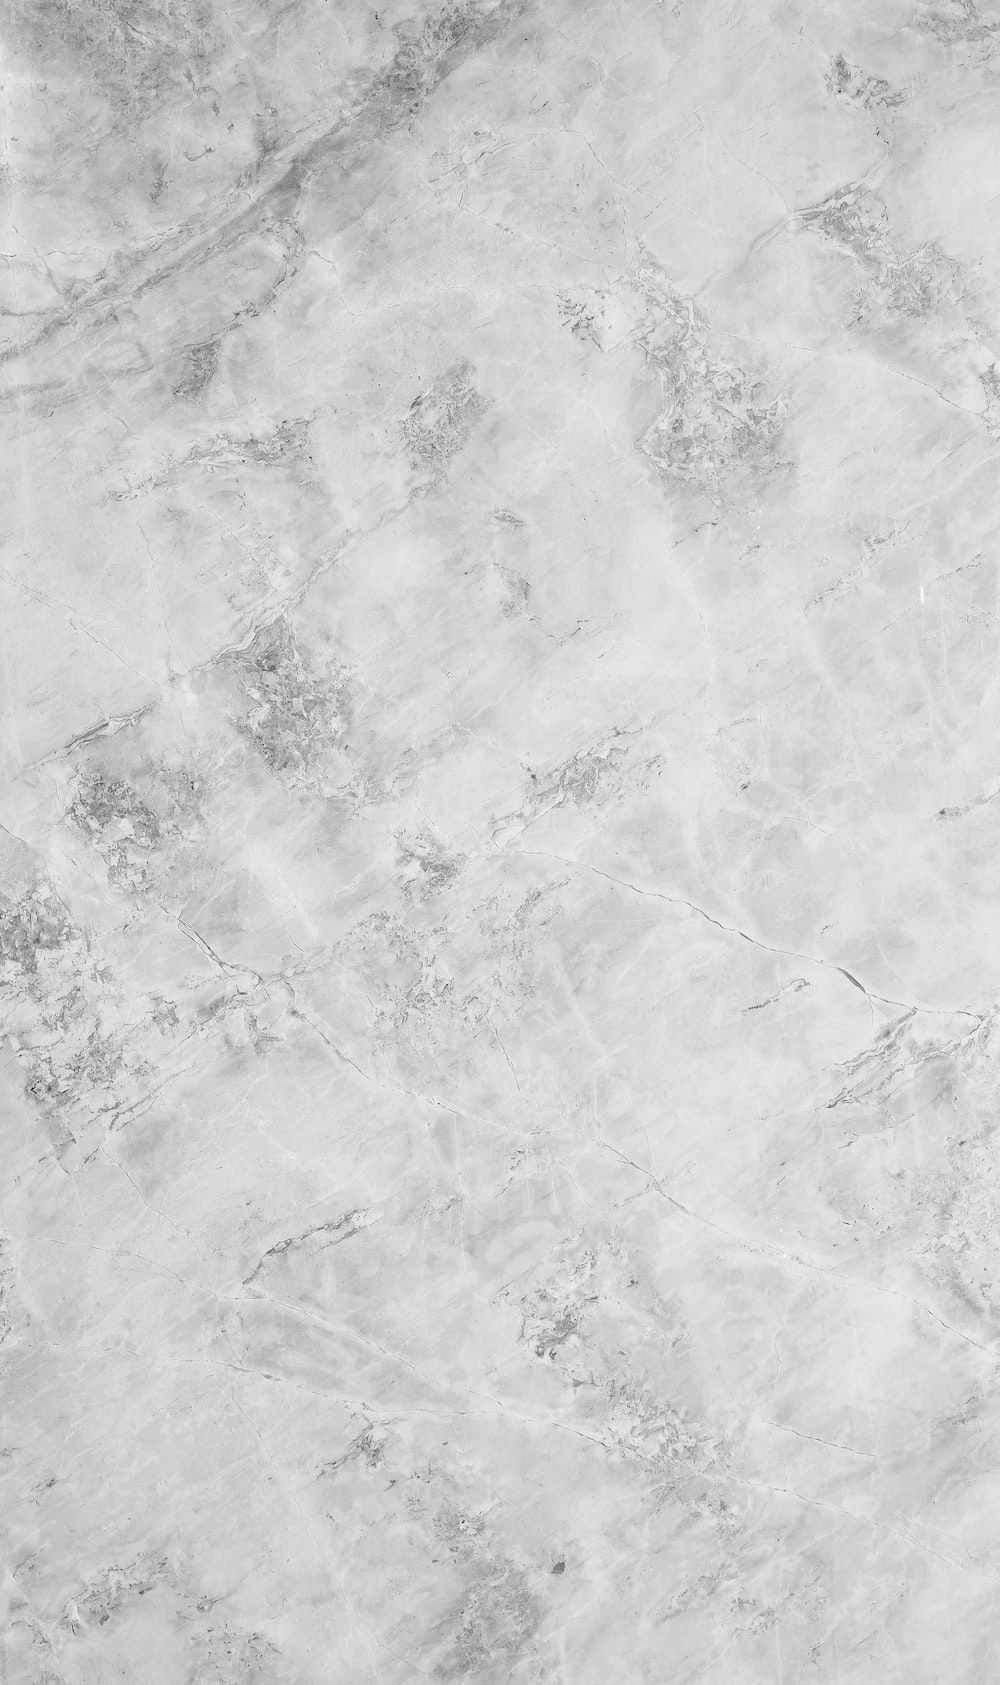 A close up of a white marble floor - Marble